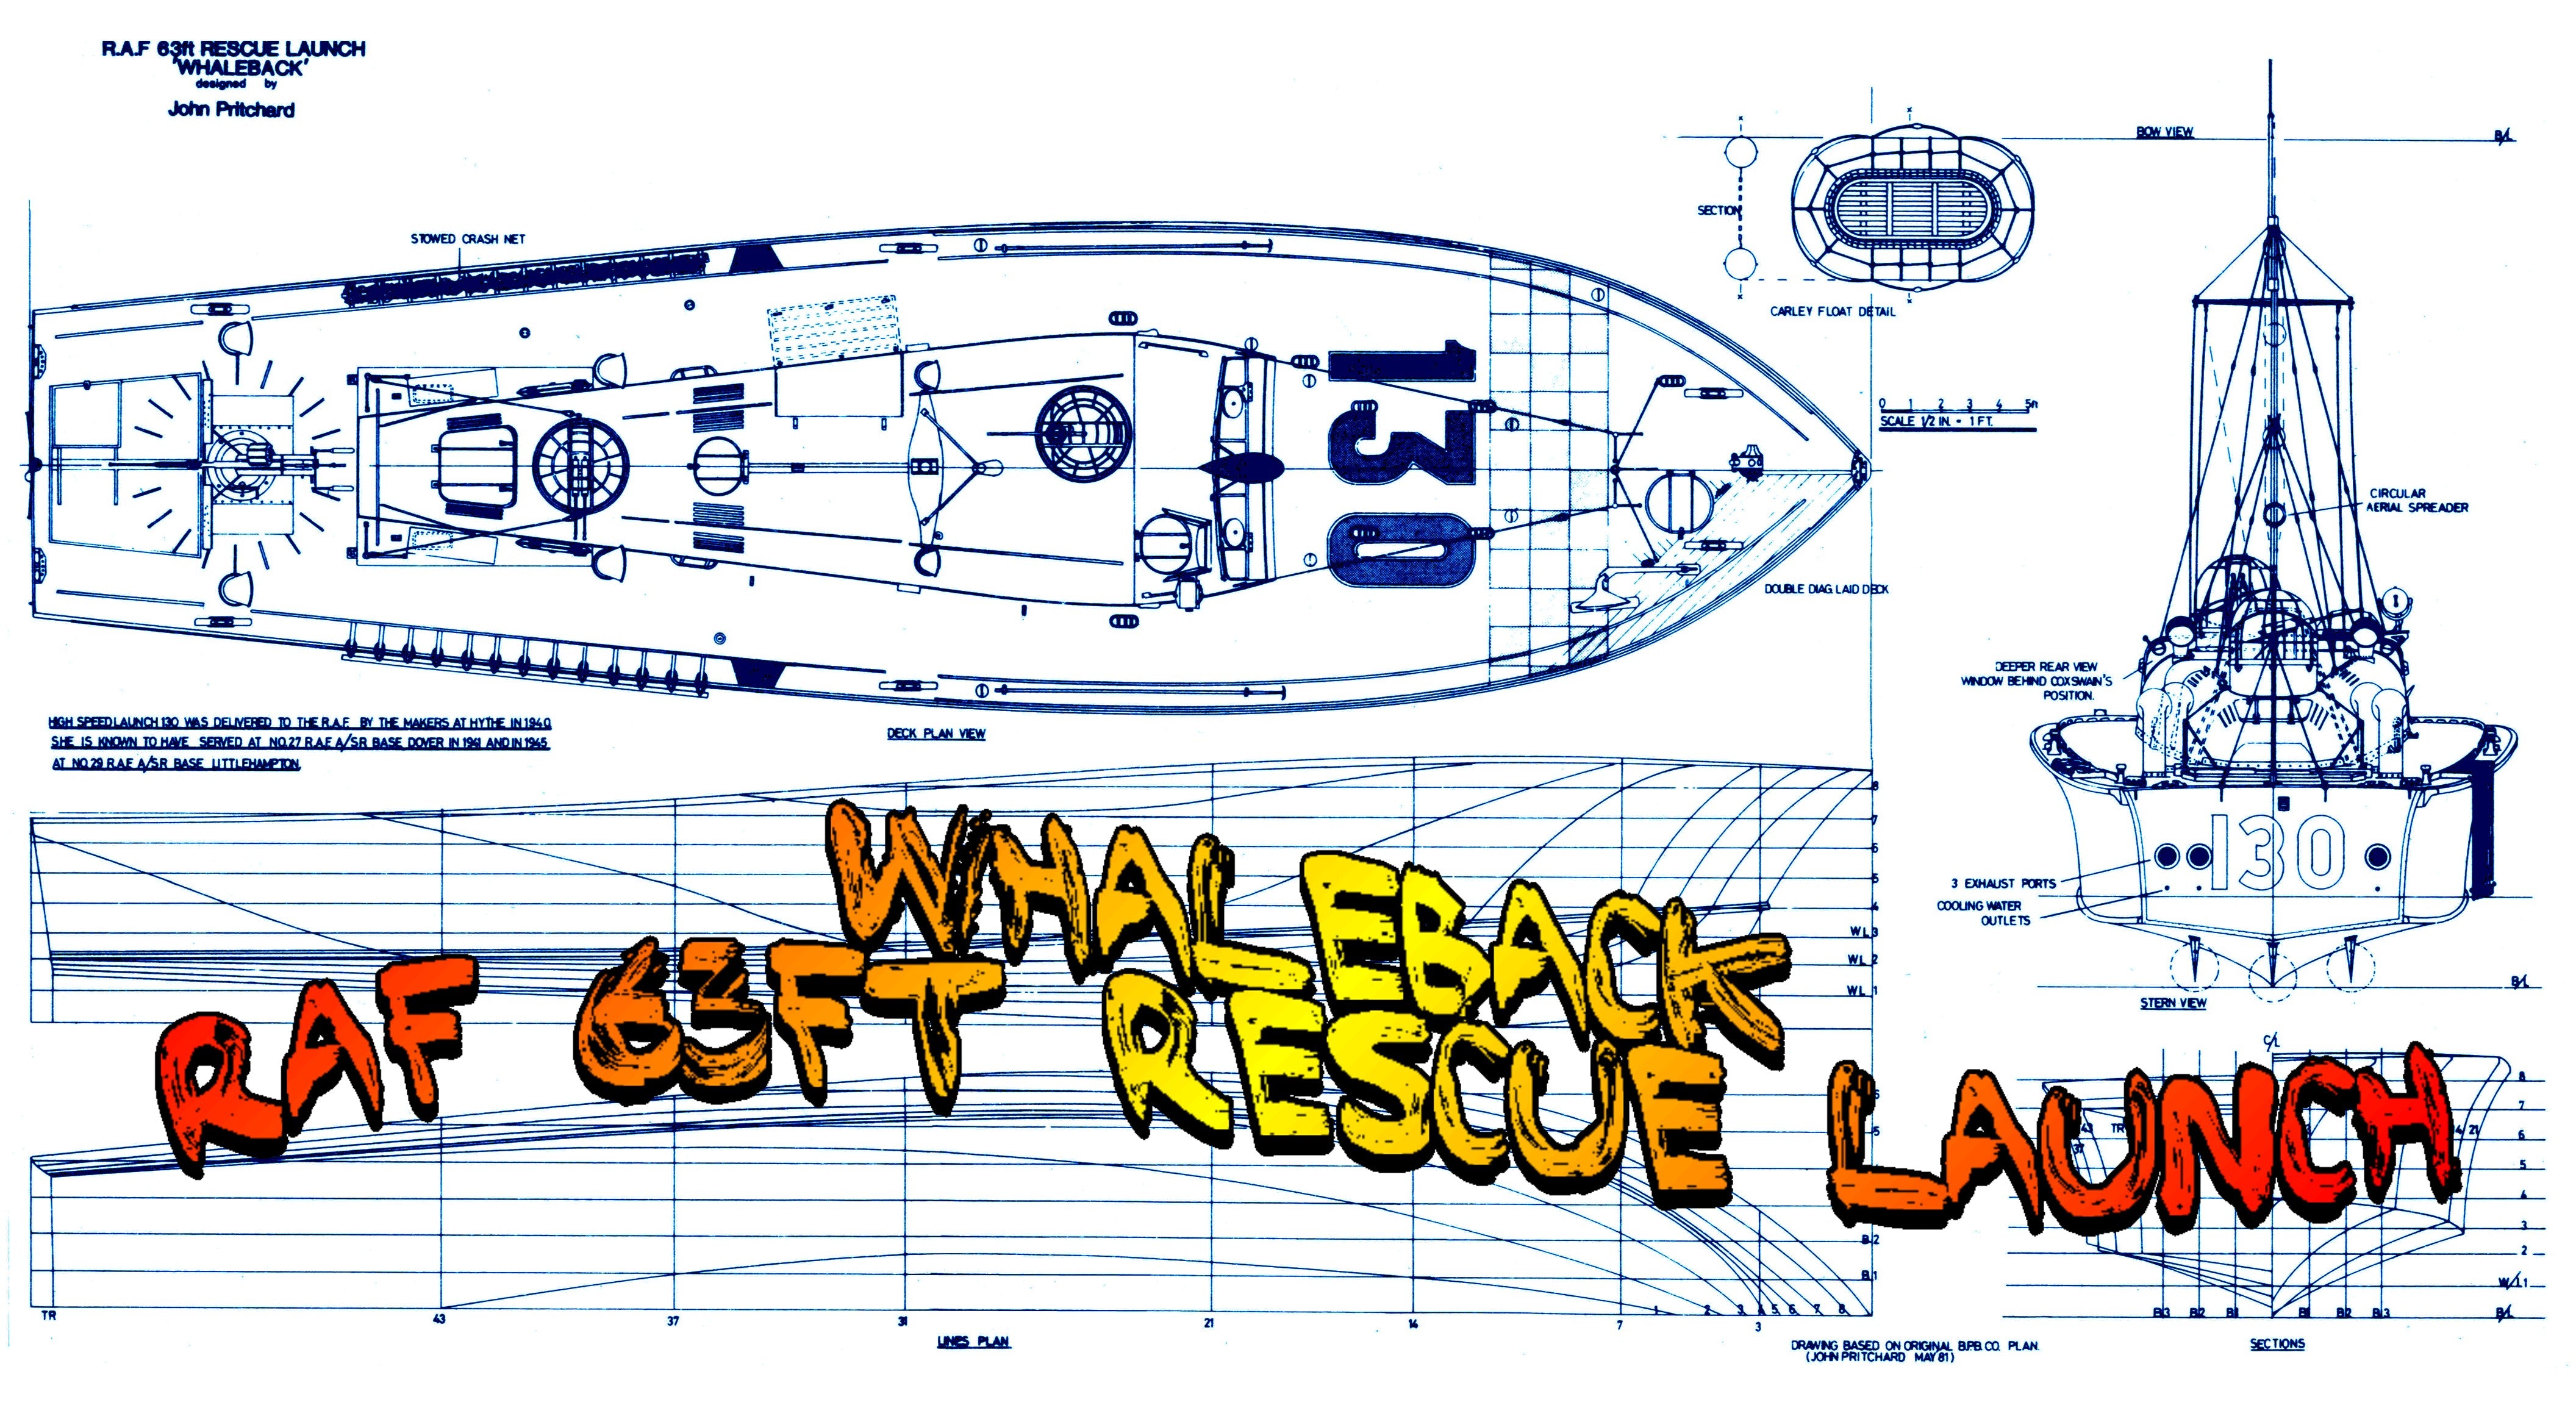 full size printed plans scale 1:24 l 31 1/2" whaleback  raf 63ft rescue launch